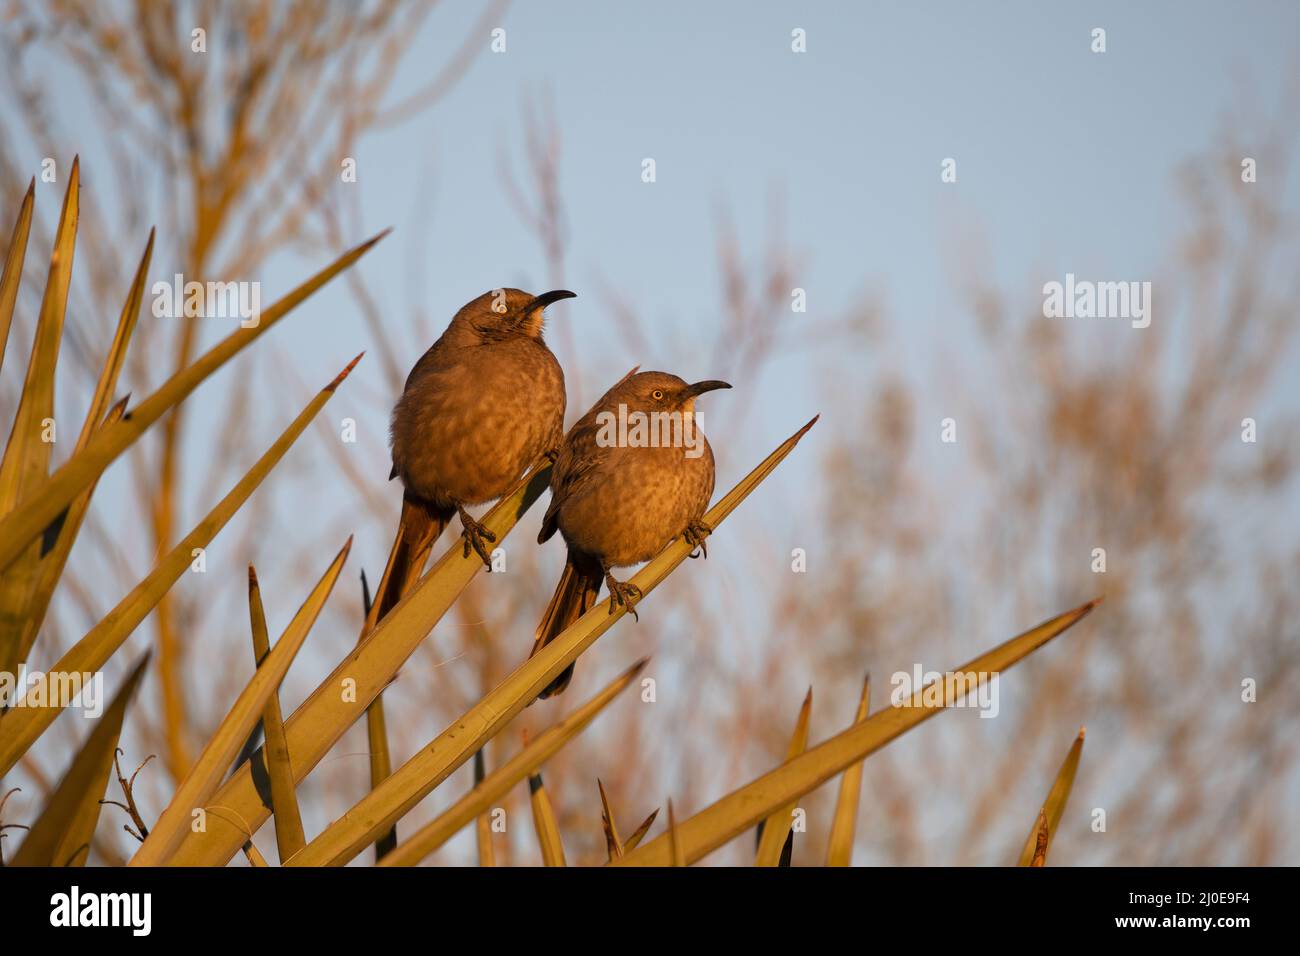 Beautiful morning glow on two, sunlit, perched Curved billed Thrashers with golden eyes and unique bills visible Stock Photo